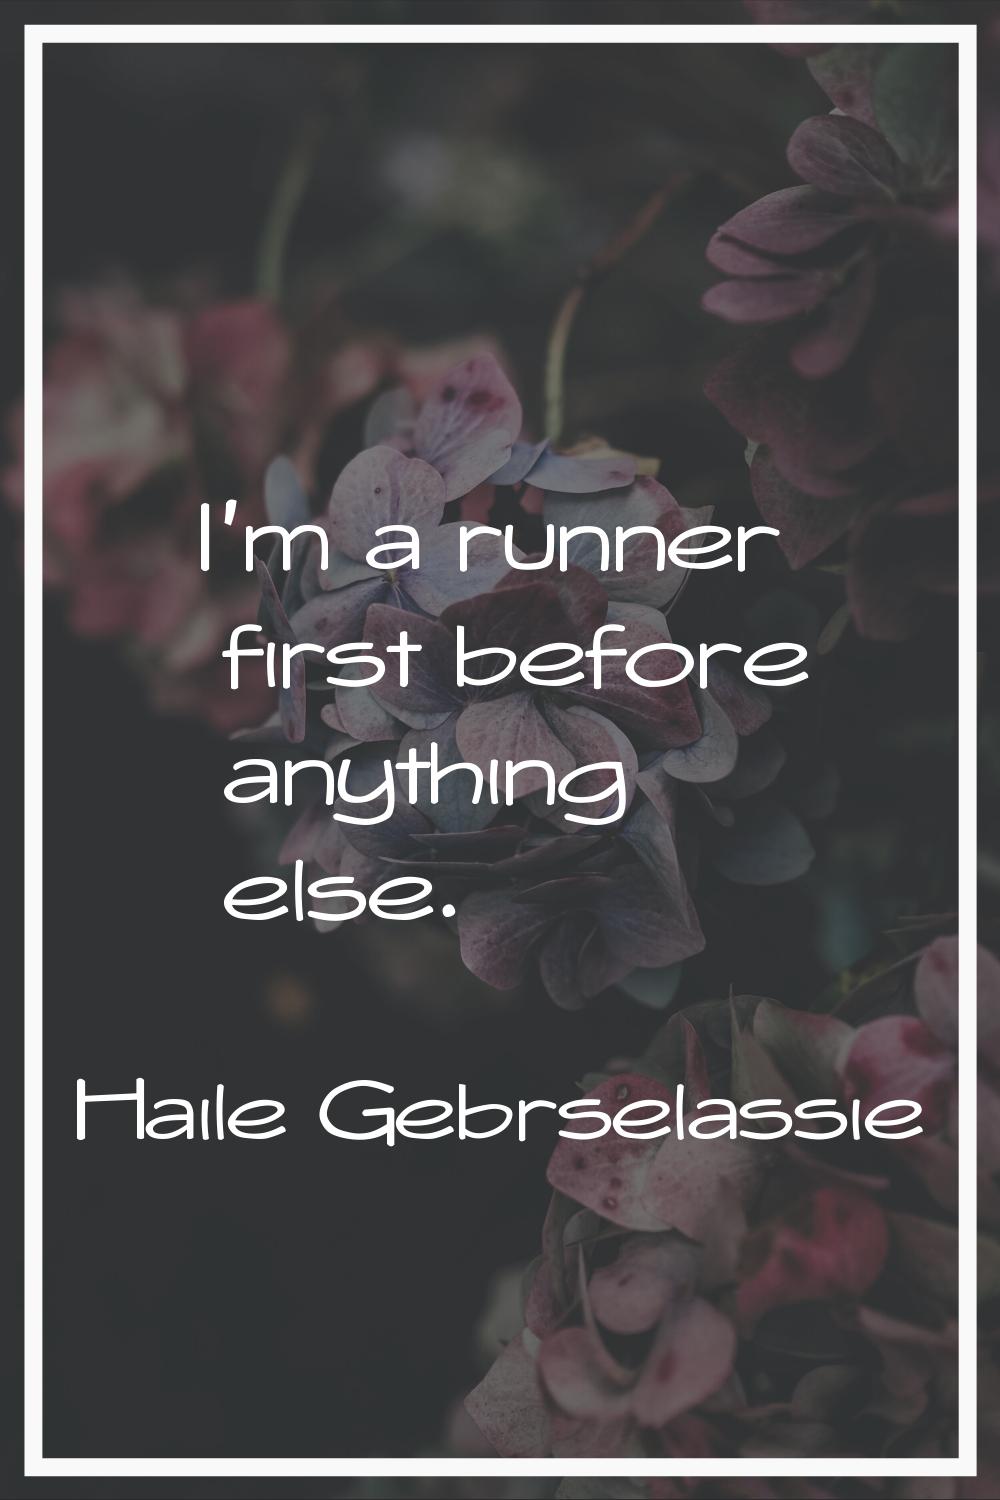 I'm a runner first before anything else.